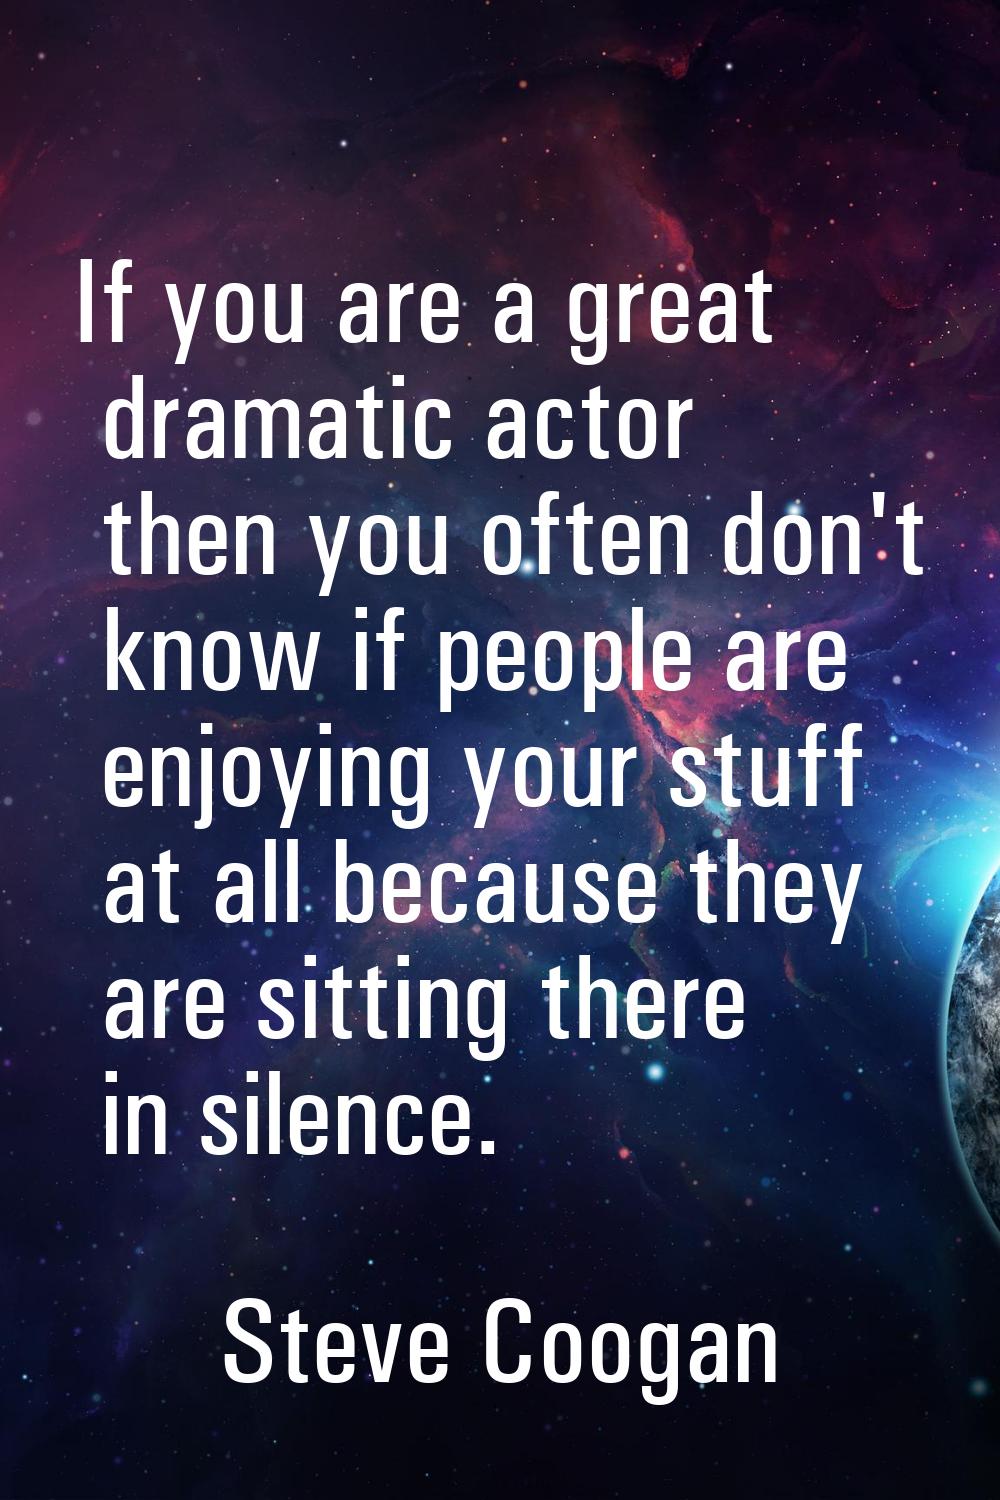 If you are a great dramatic actor then you often don't know if people are enjoying your stuff at al